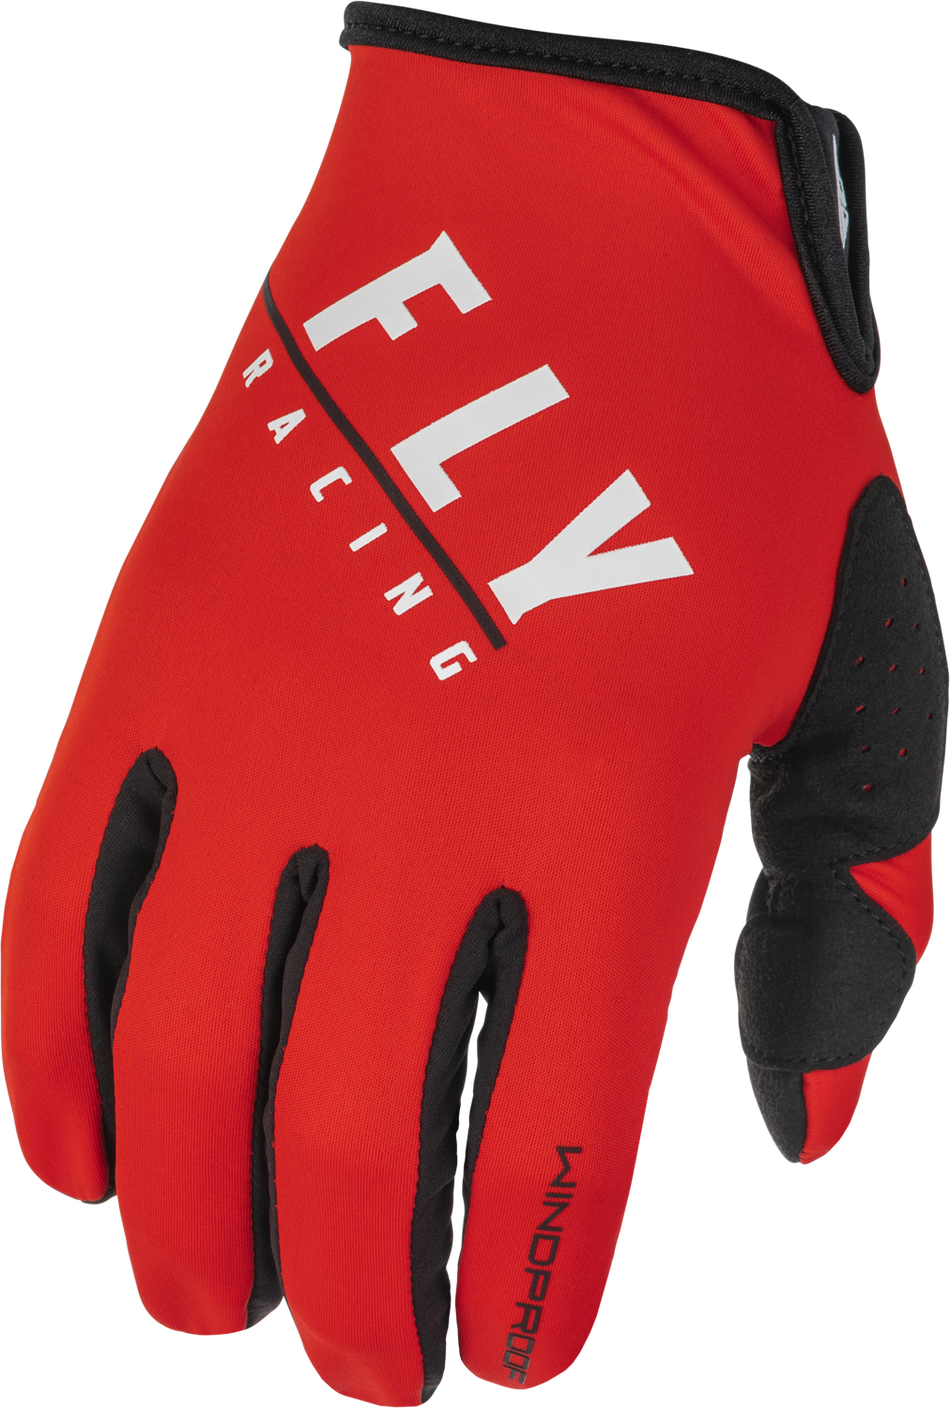 FLY RACING Windproof Gloves Black/Red Sz 10 371-14310